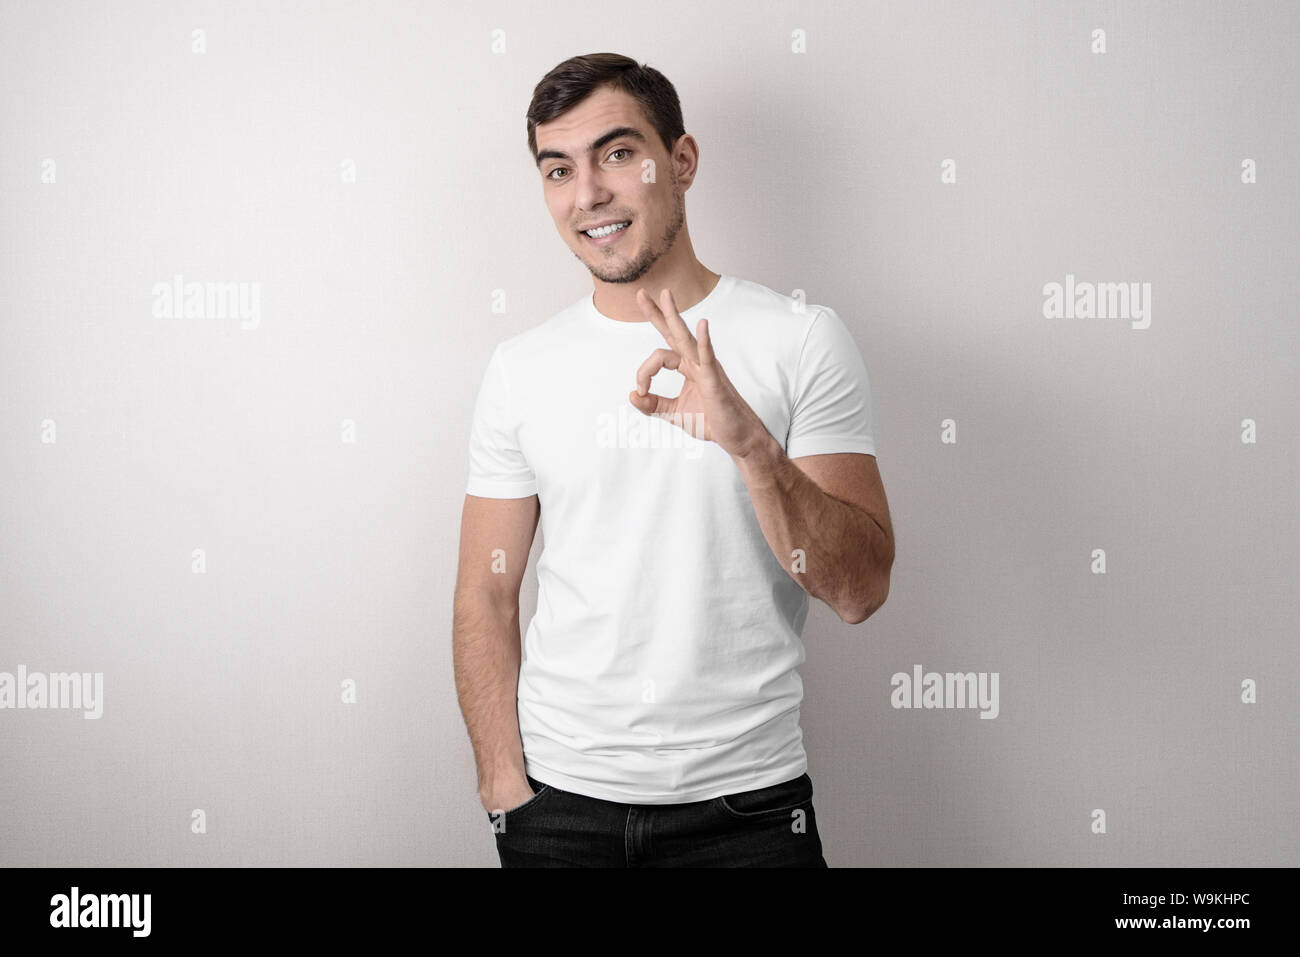 Young European man in white t-shirt on grey background shows OK sign, studio shots Stock Photo